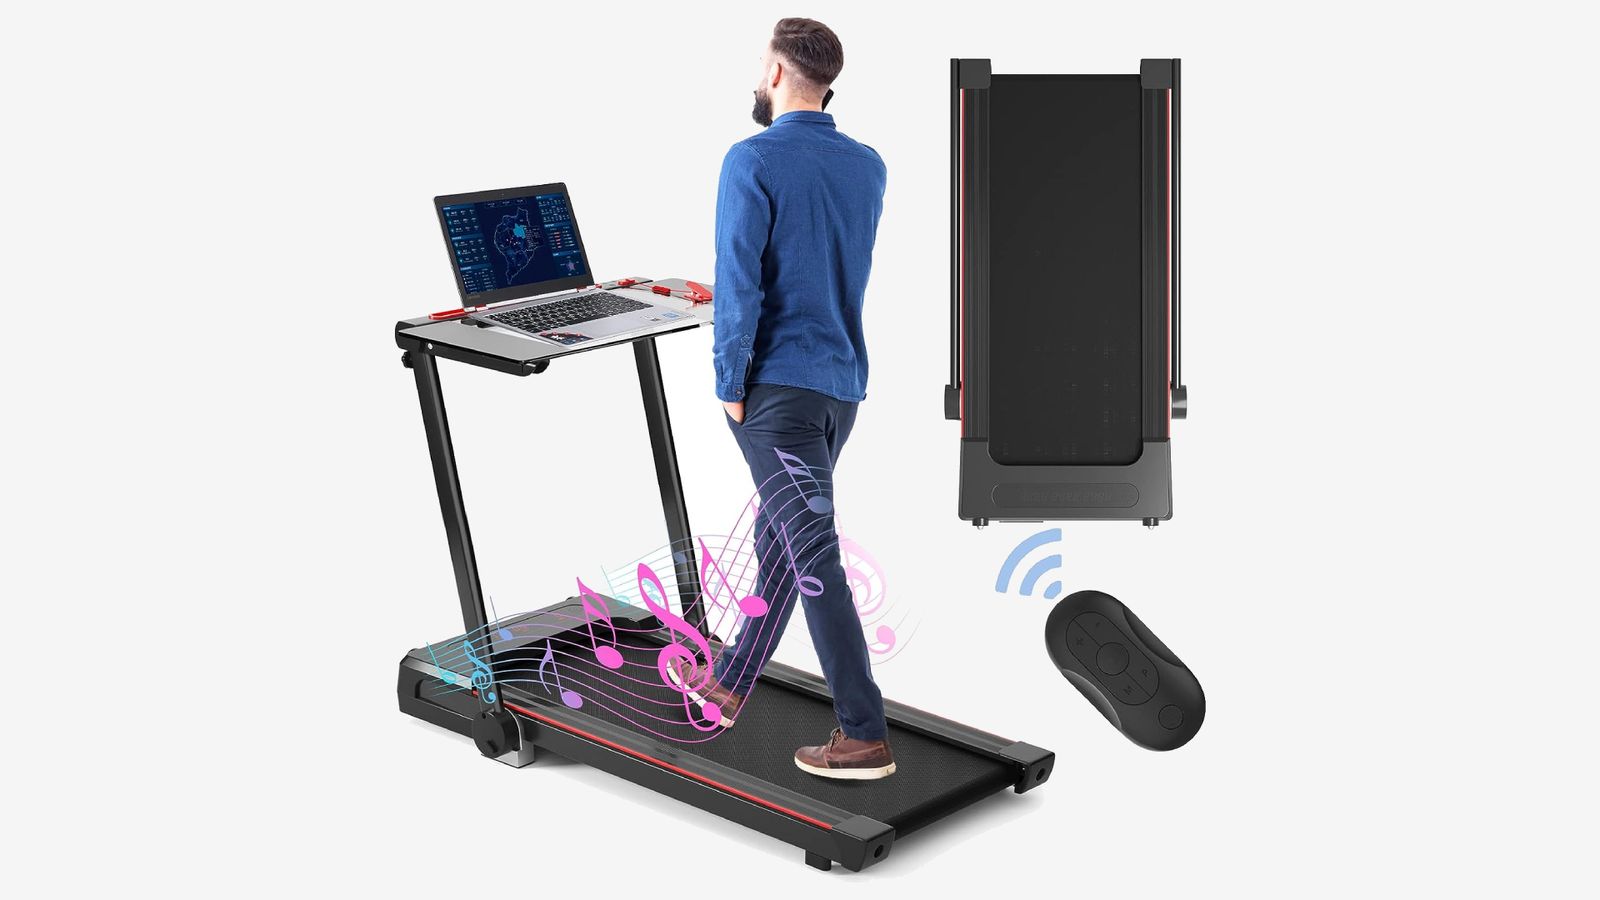 Gymax Treadmill with Desk product image of someone wearing a blue shirt and jeans walking on a black treadmill with red details.